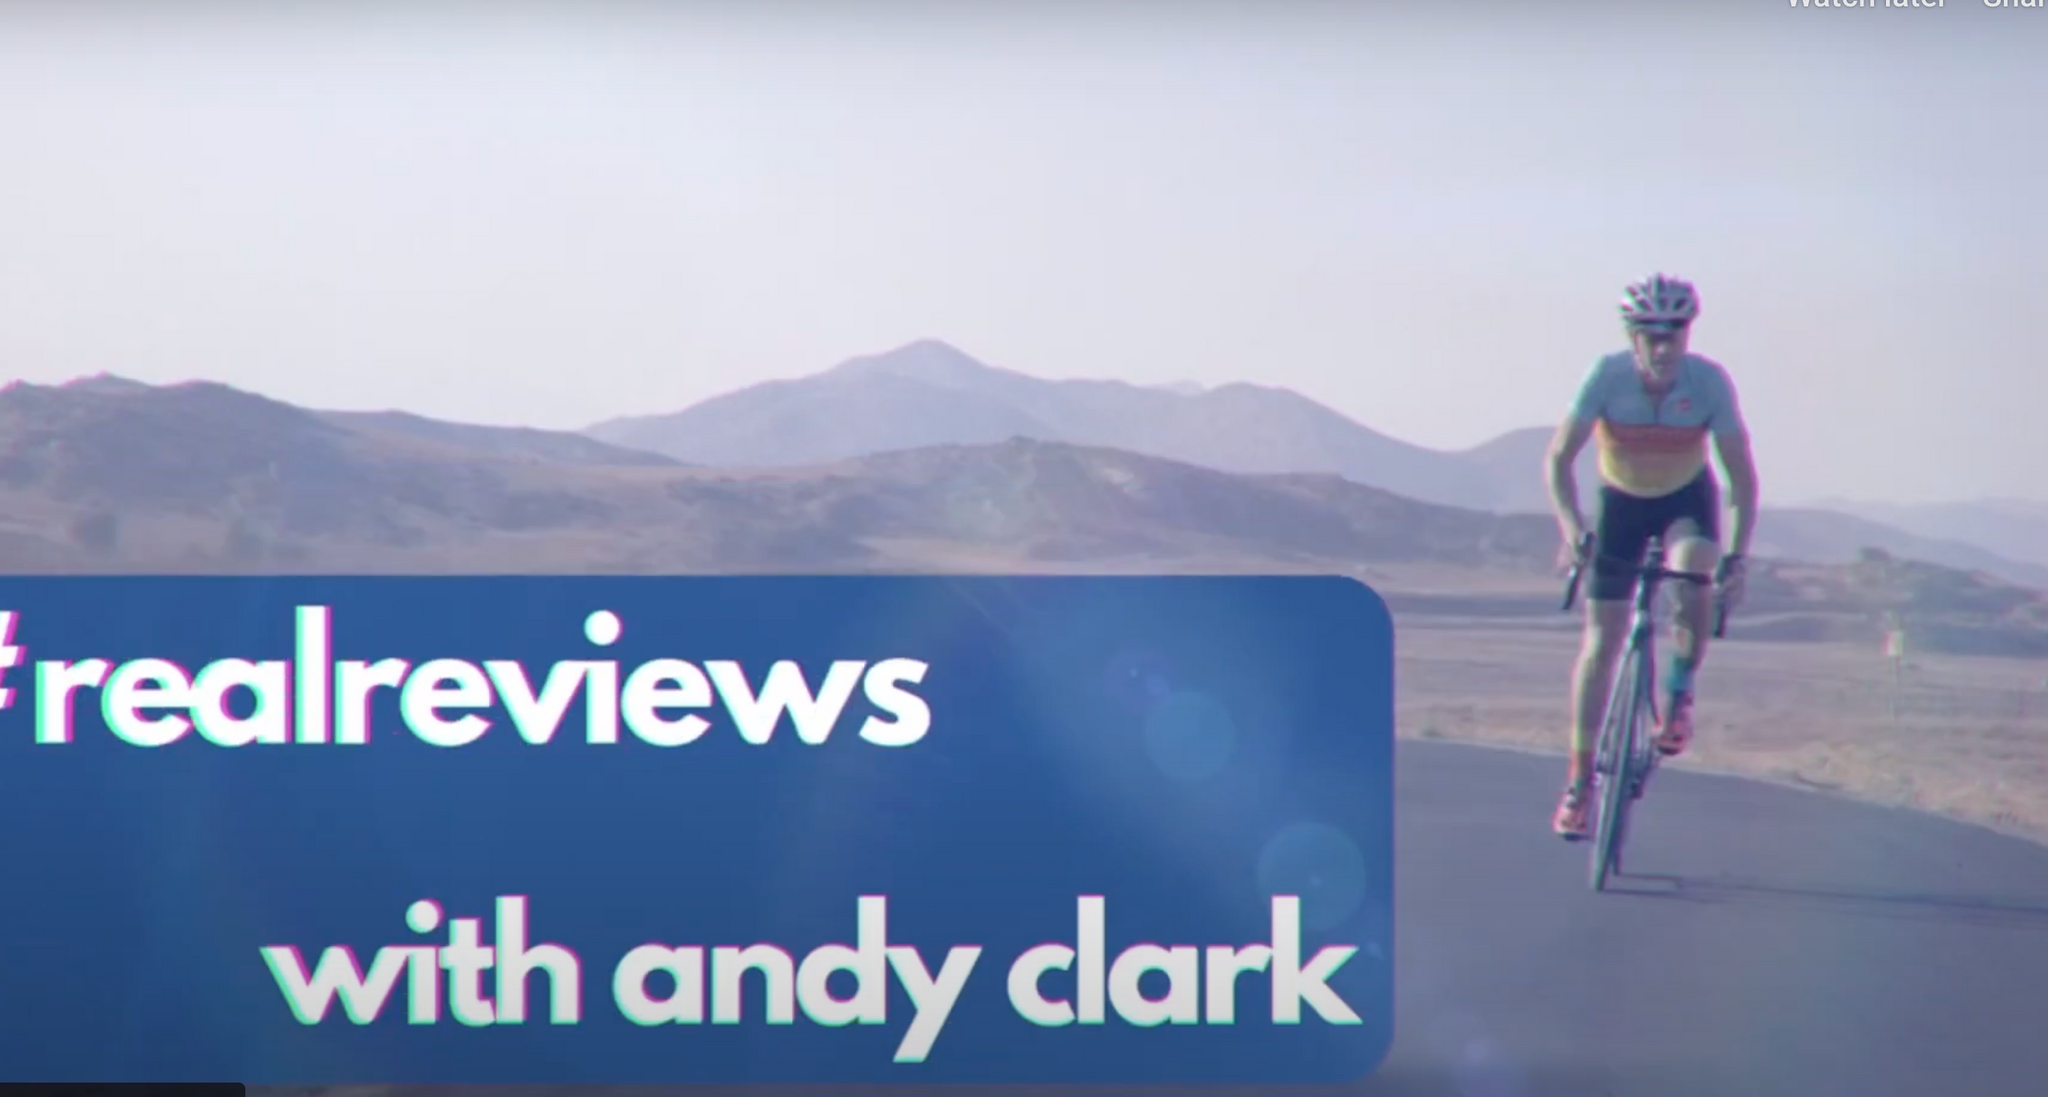 Andy Clark bike review videos